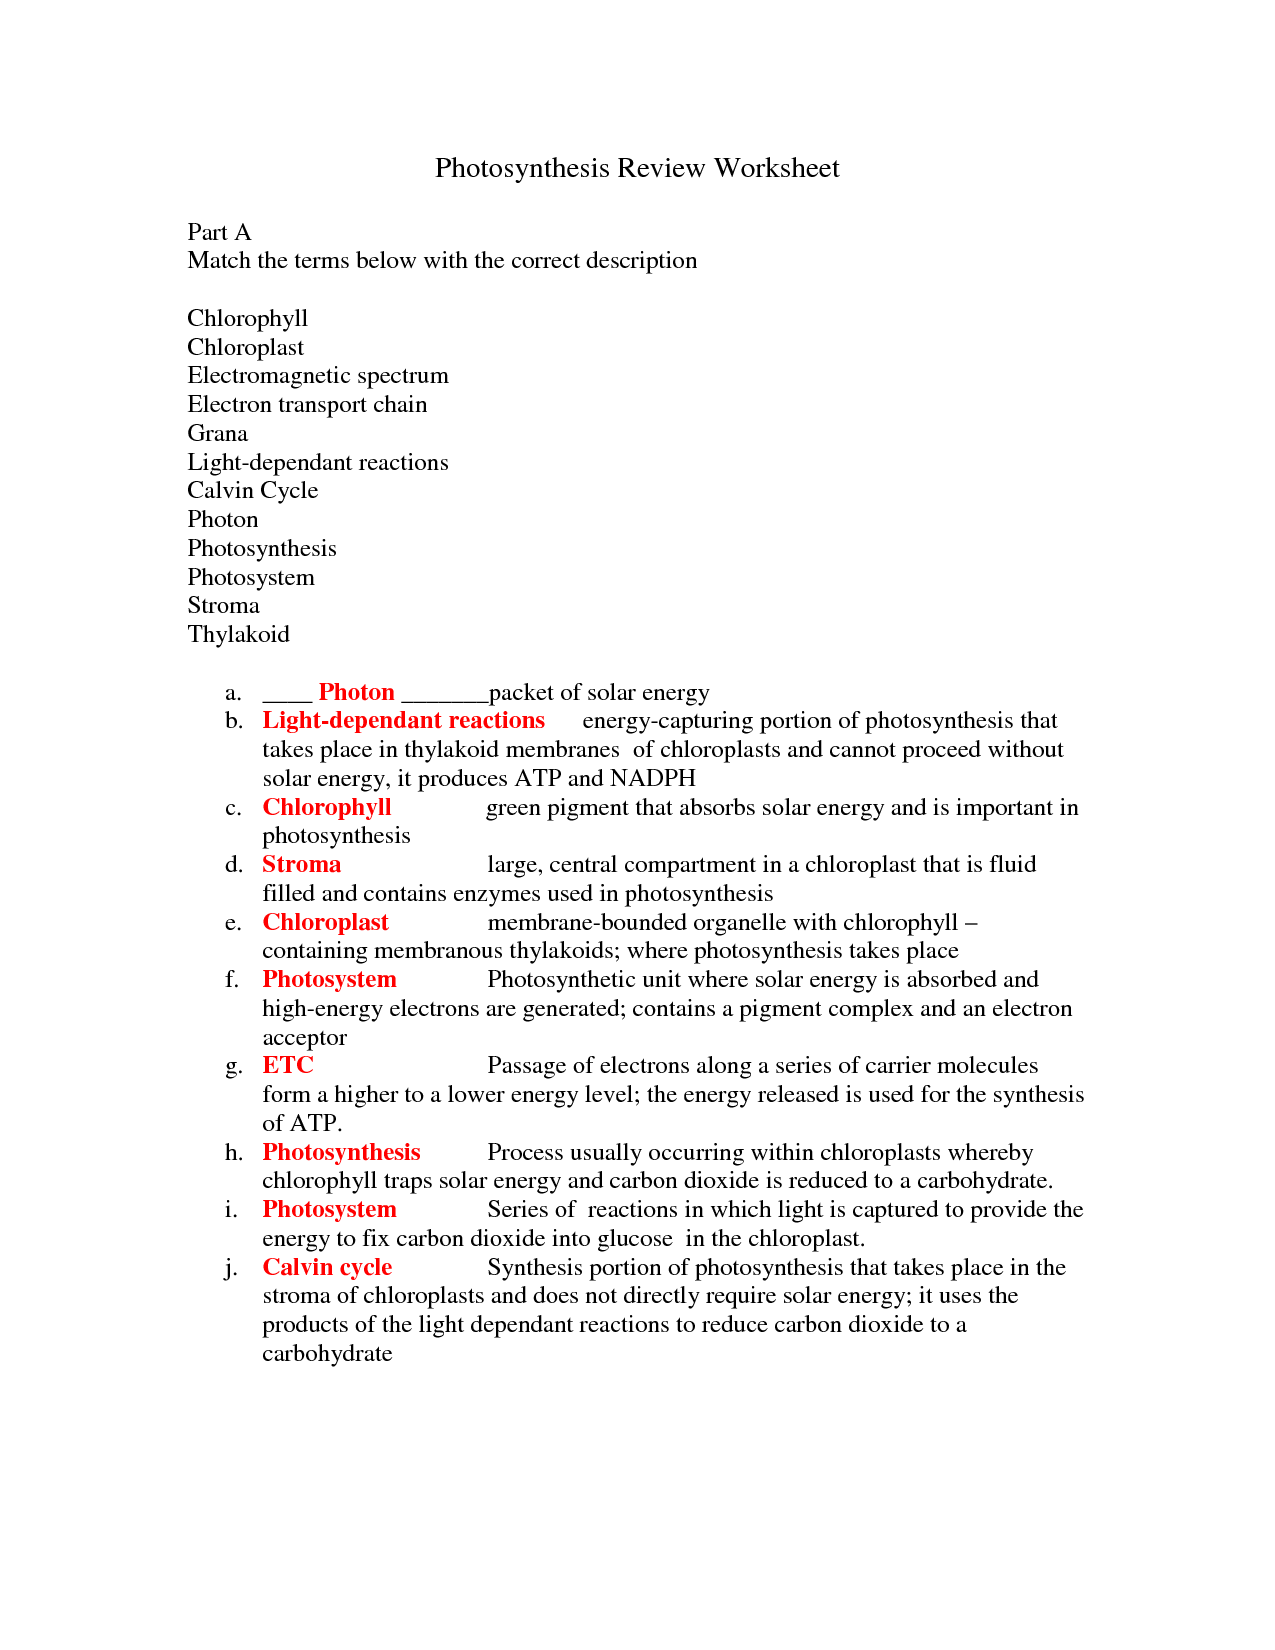 photosynthesis-and-cellular-respiration-worksheet-answer-key-lobo-black